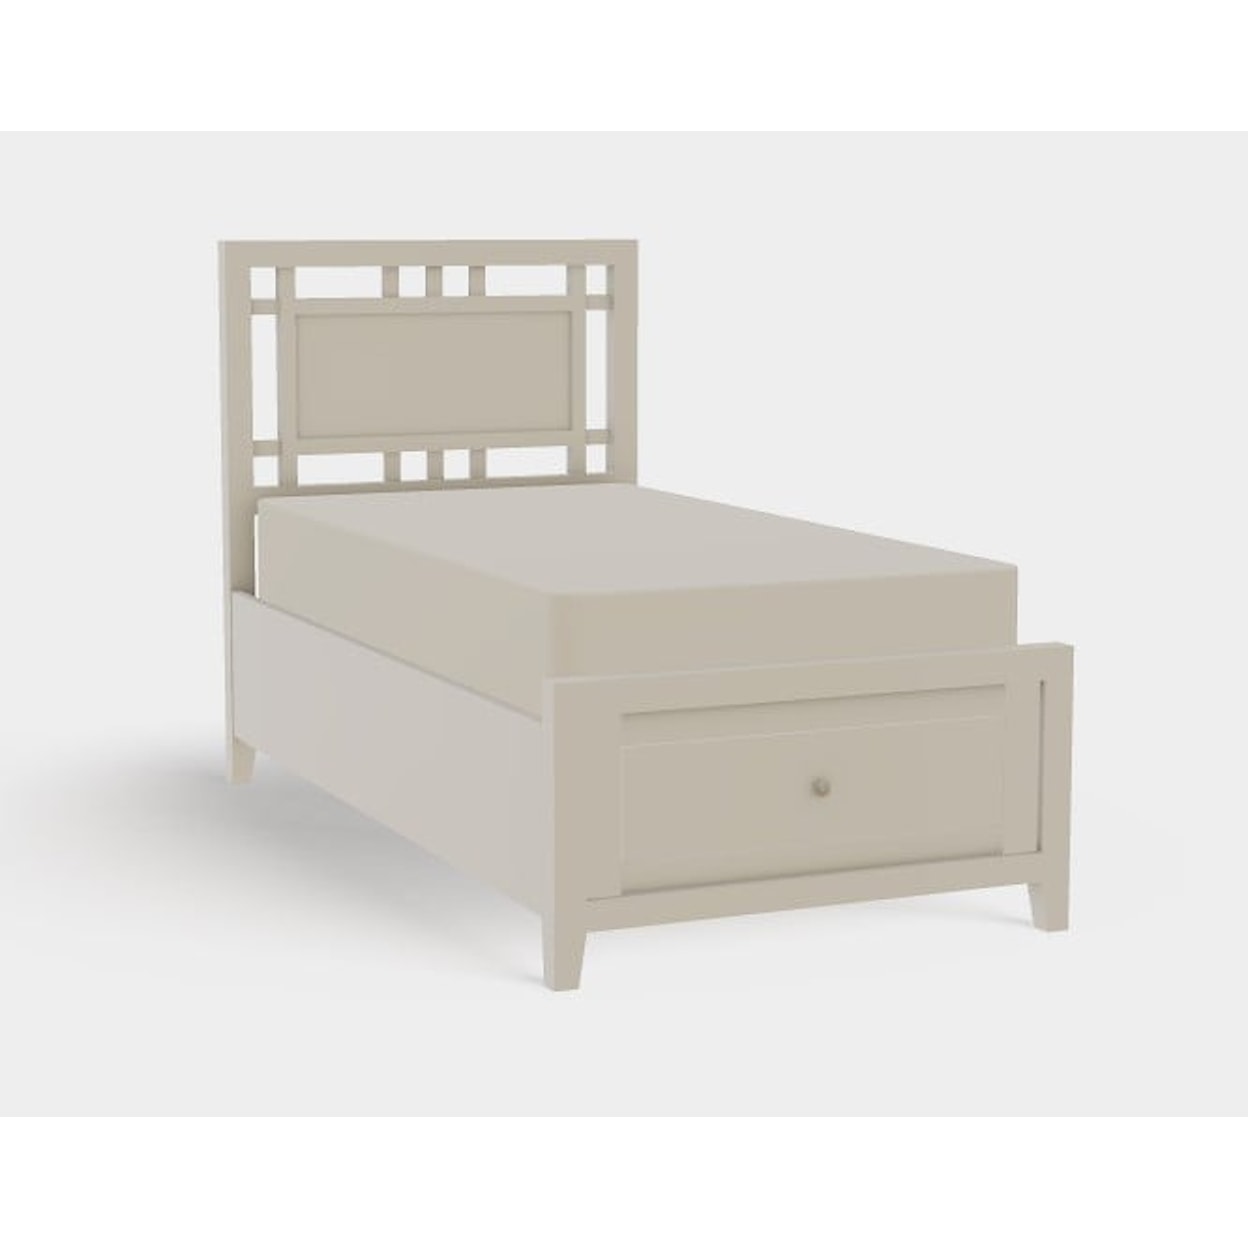 Mavin Atwood Group Atwood Twin XL End Storage Gridwork Bed